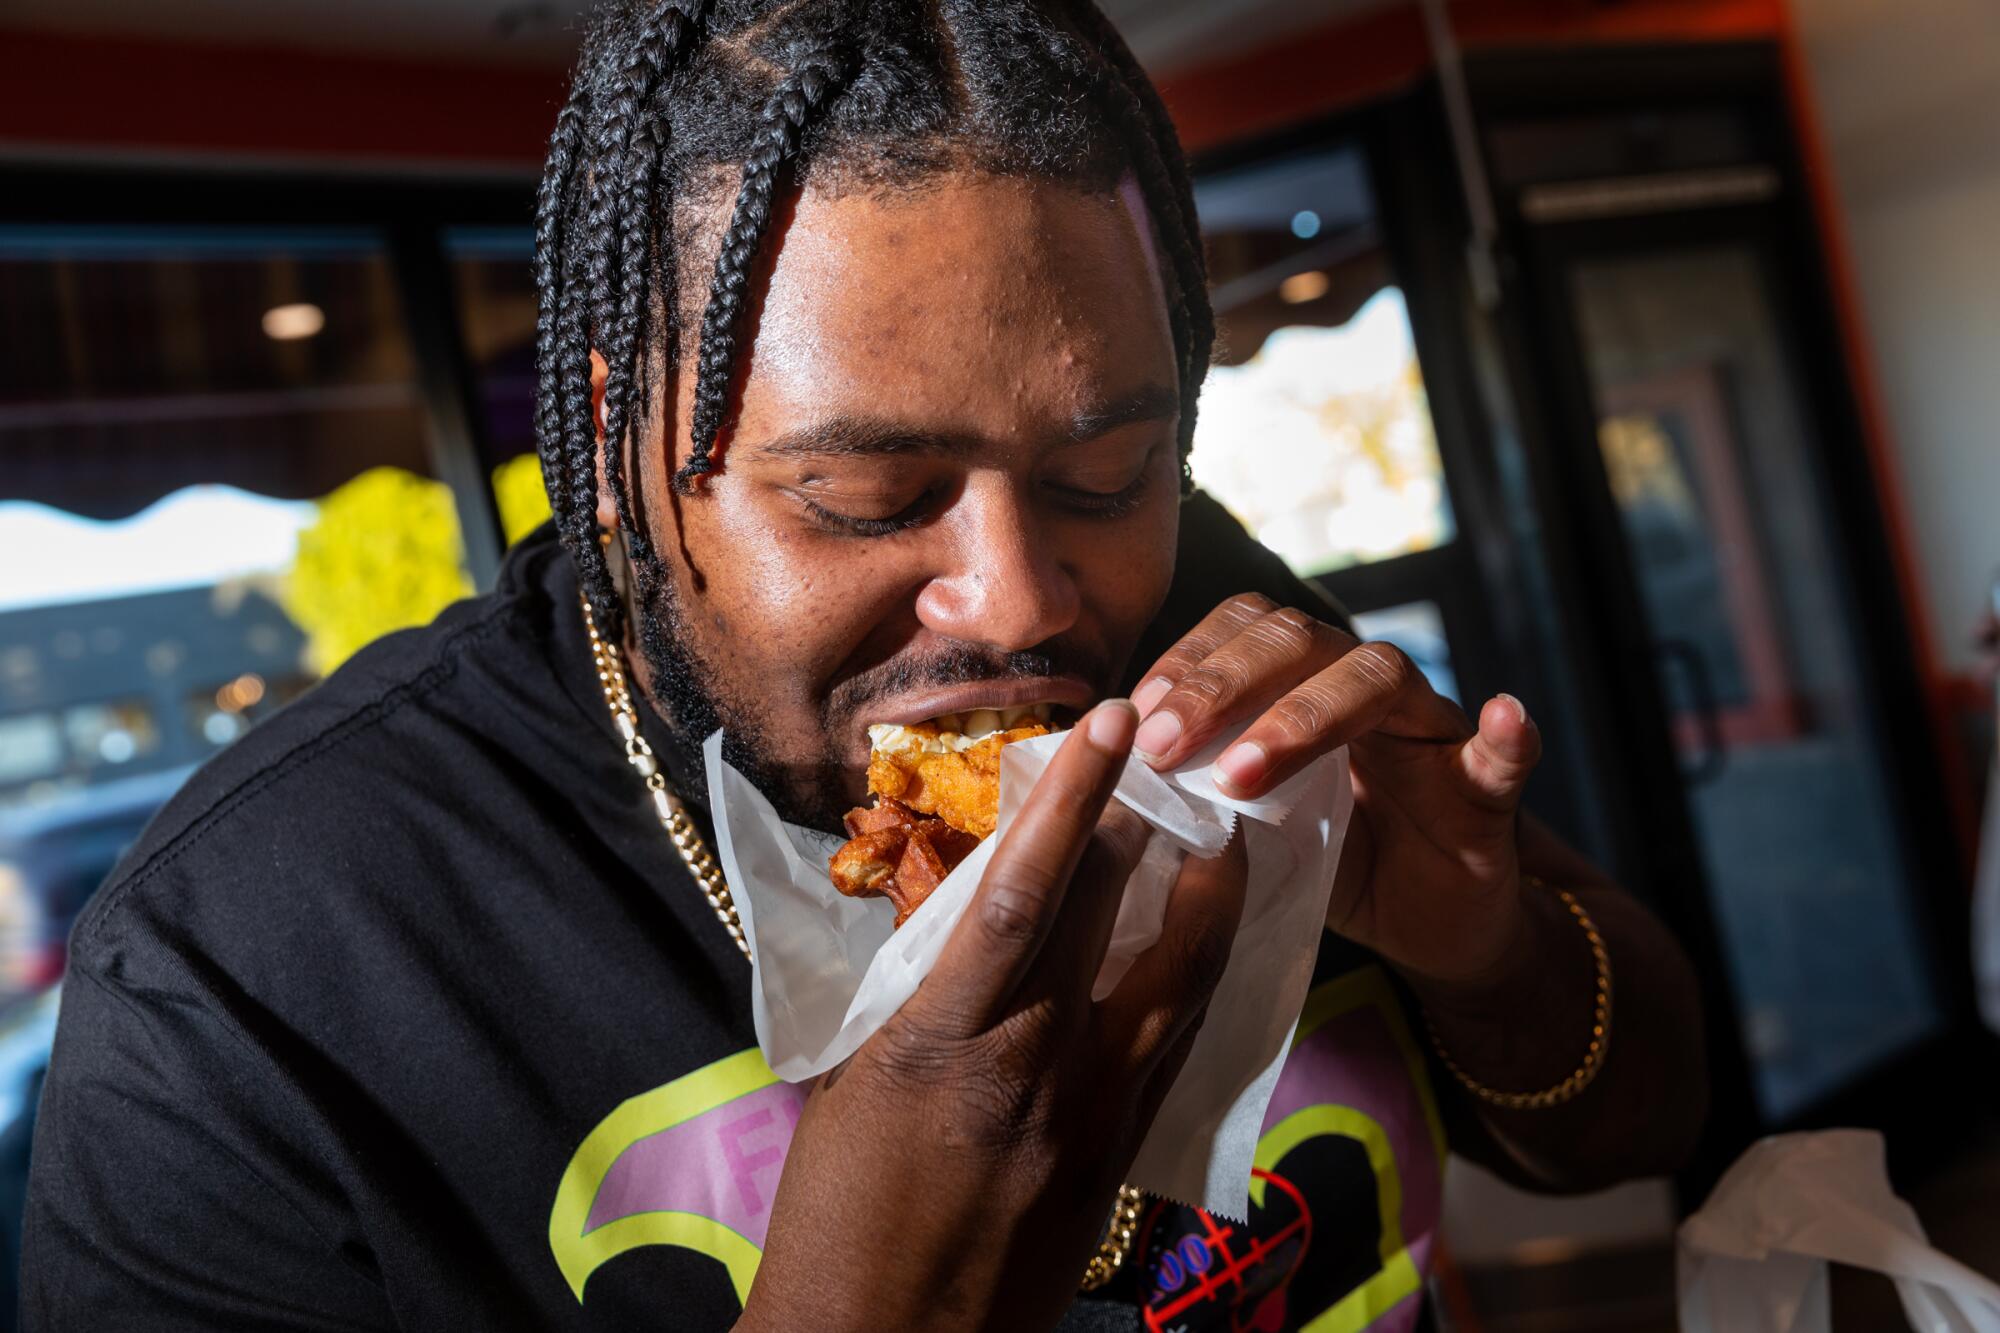 Danny Shell couldn't stop smiling after biting into his waffle slider at CJ's Wings.